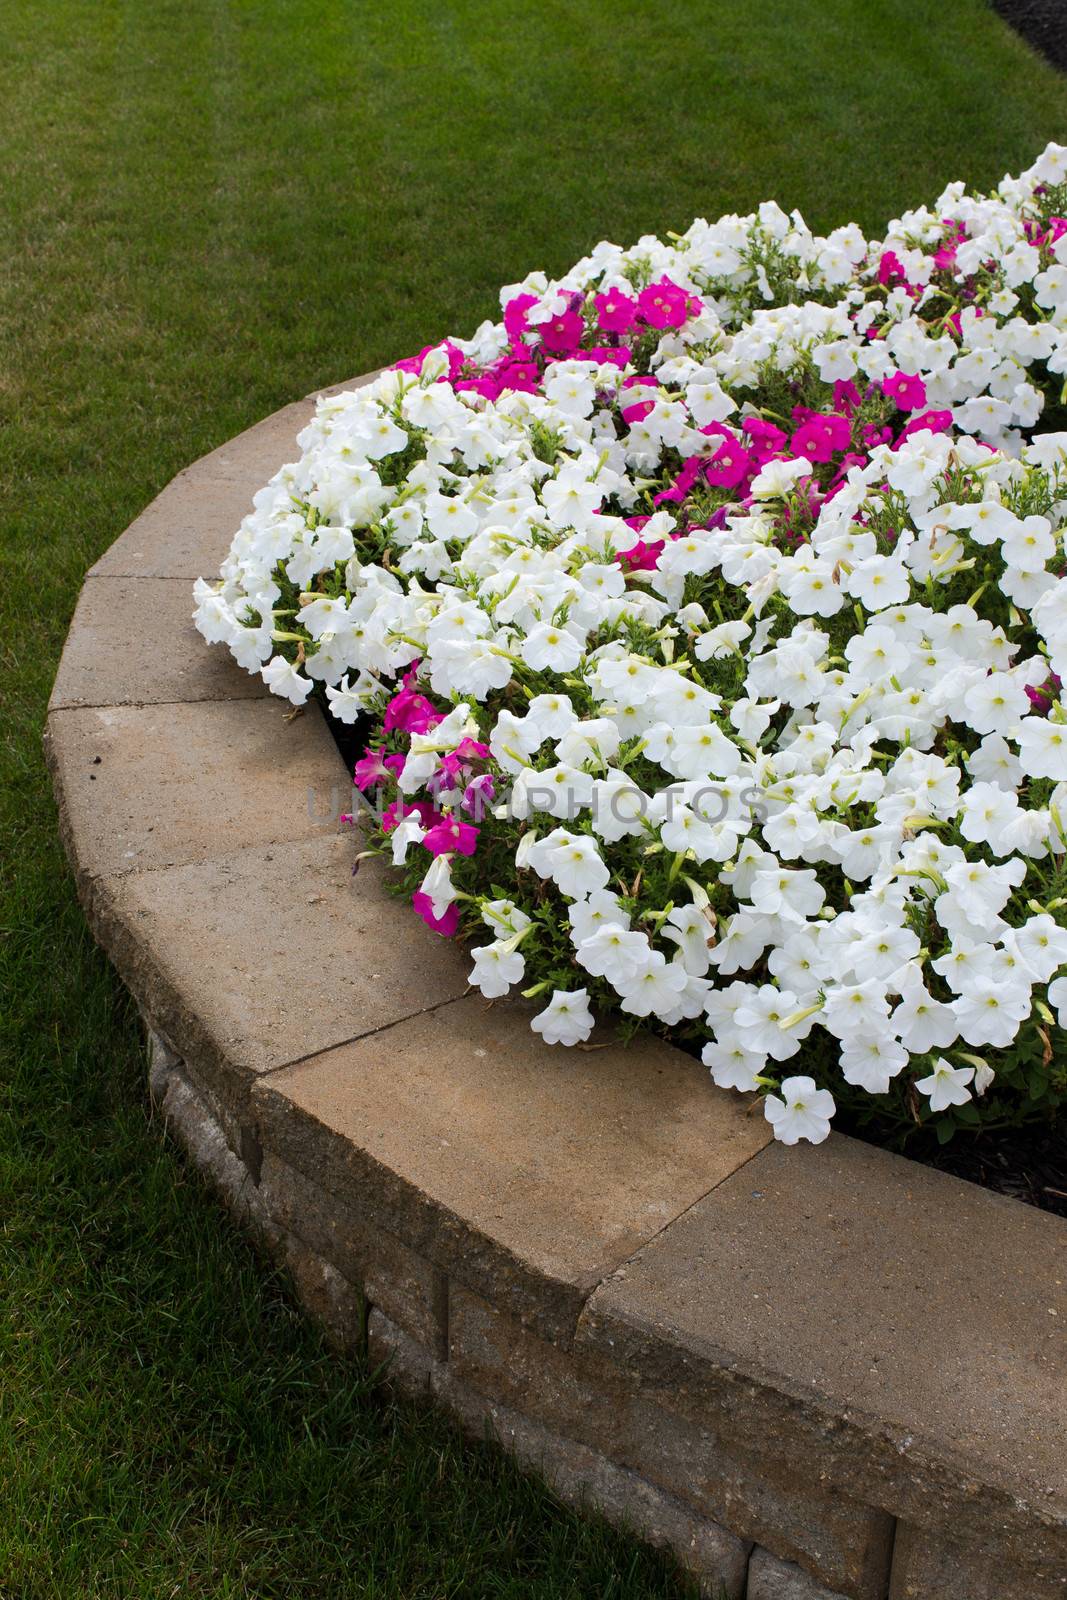 Petunias on the Brick Retaining Wall by coskun